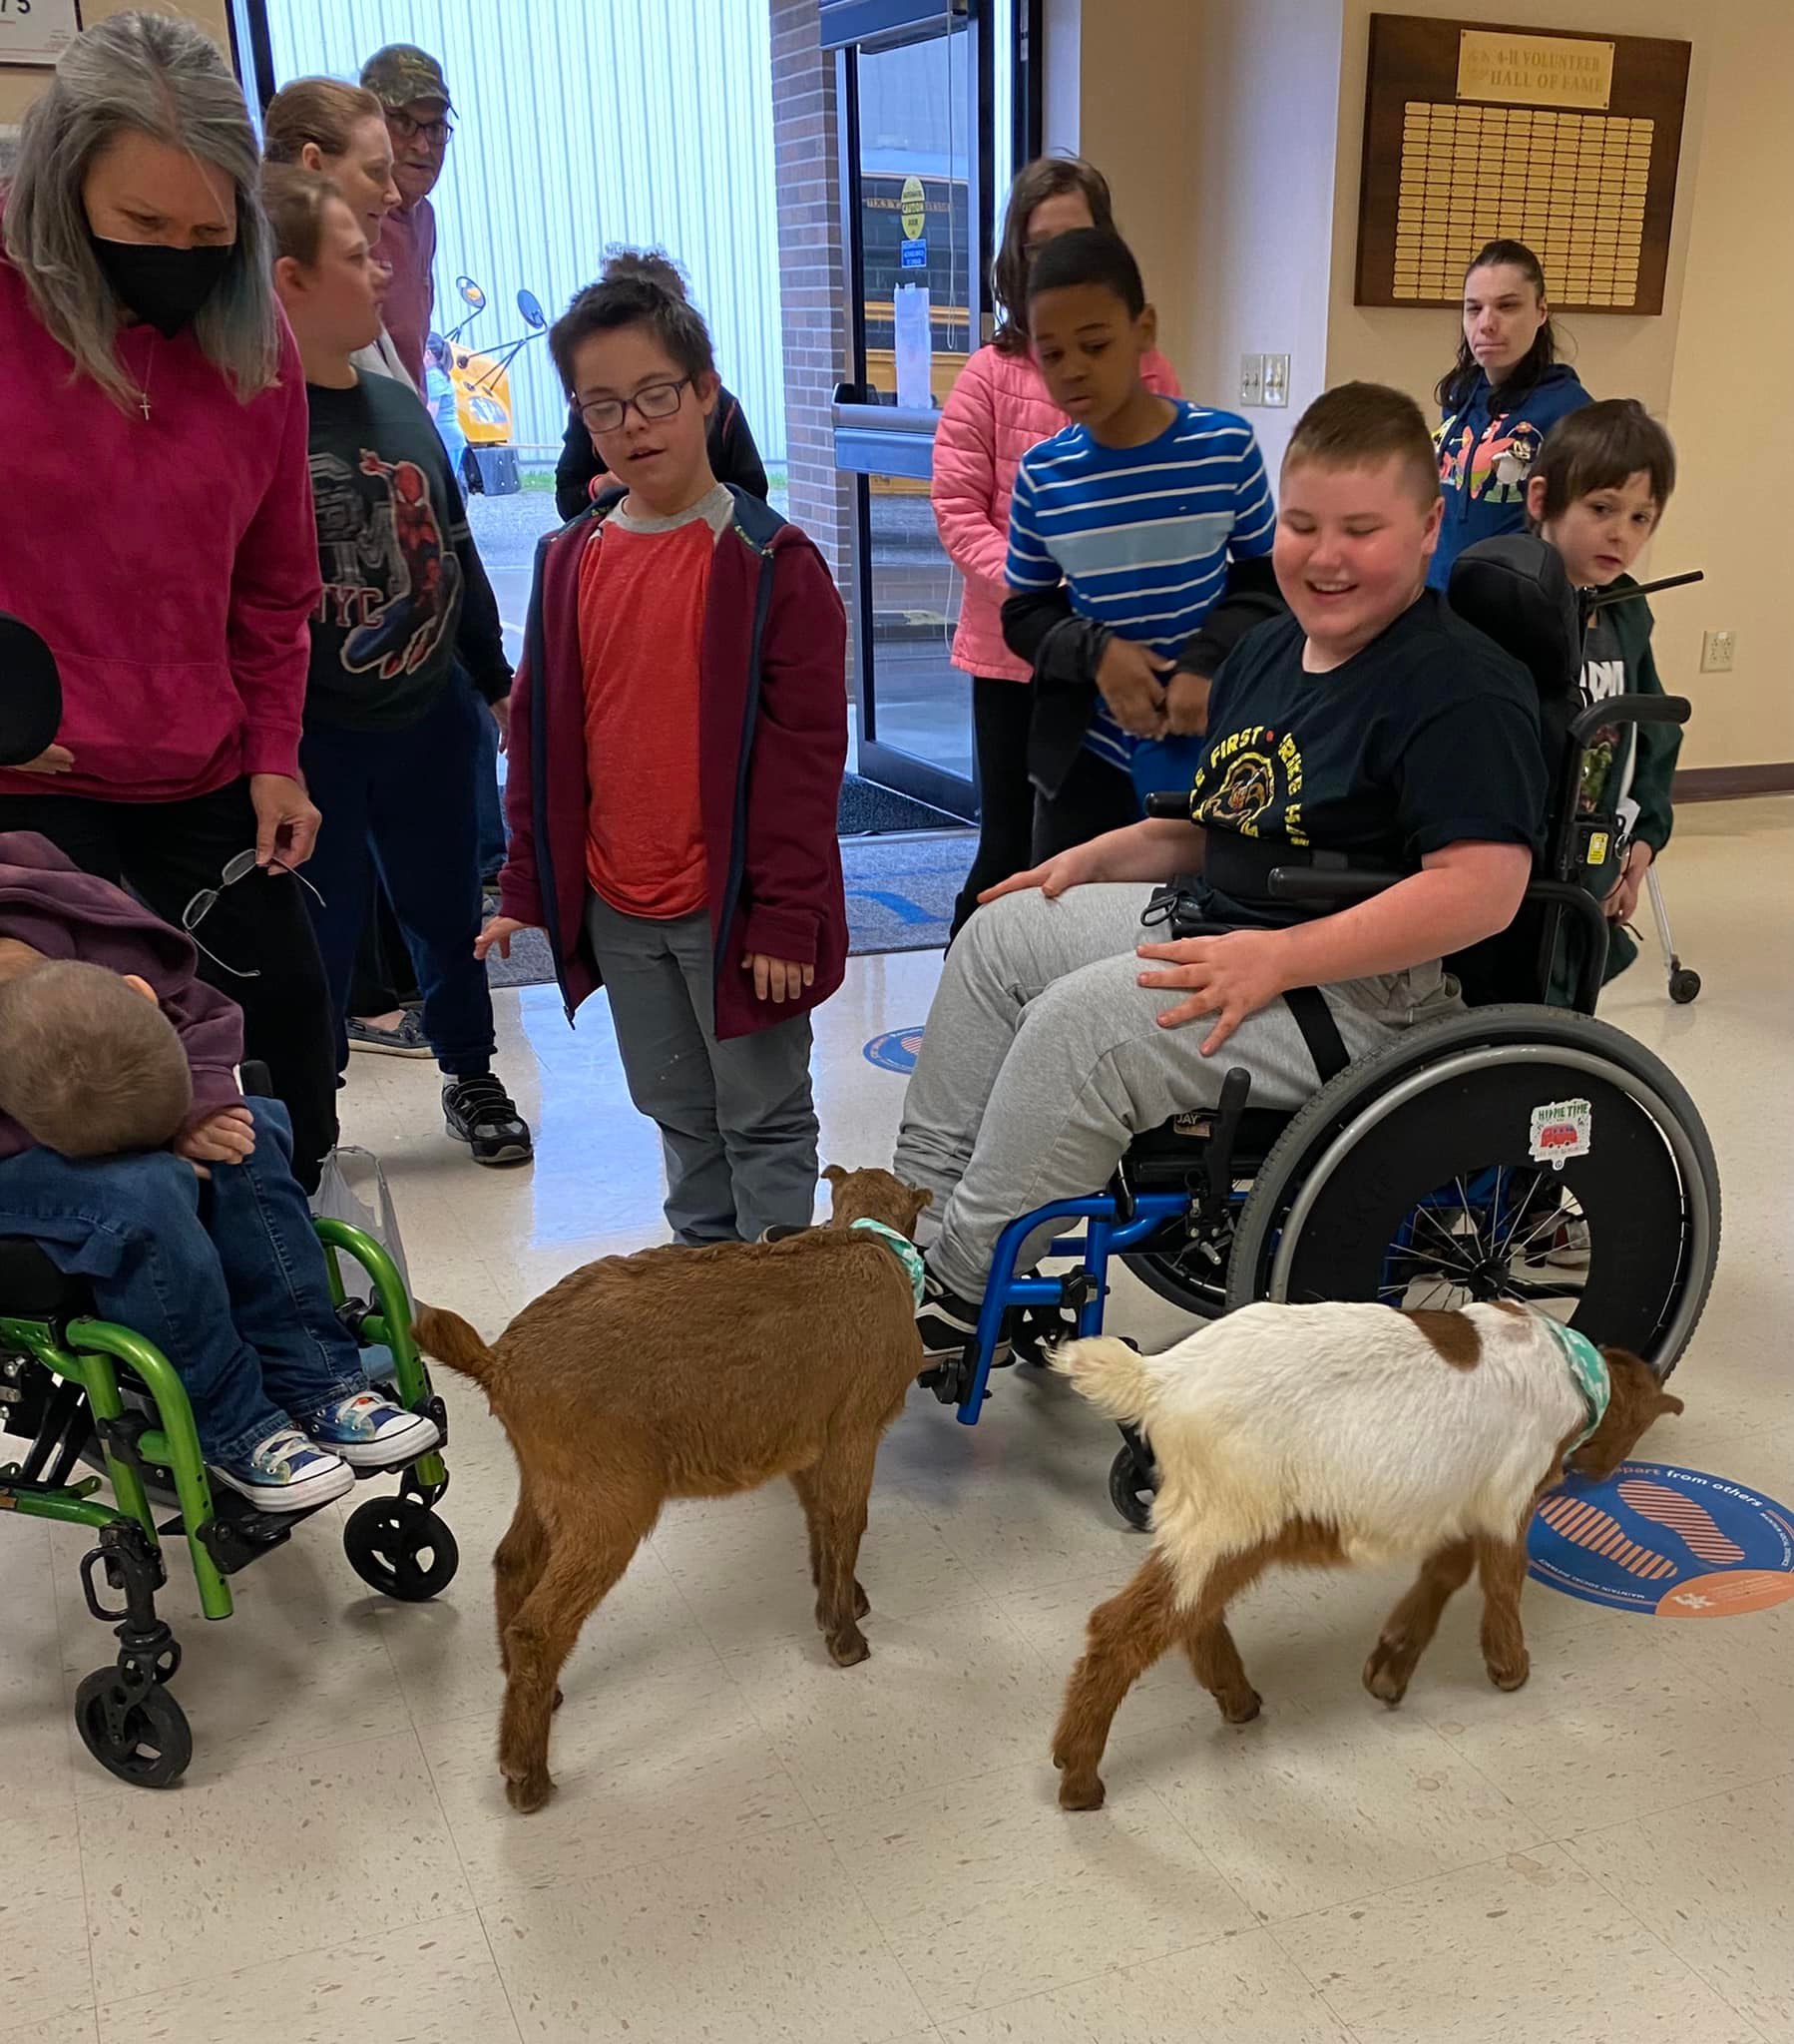 Children in wheelchairs play with baby goats